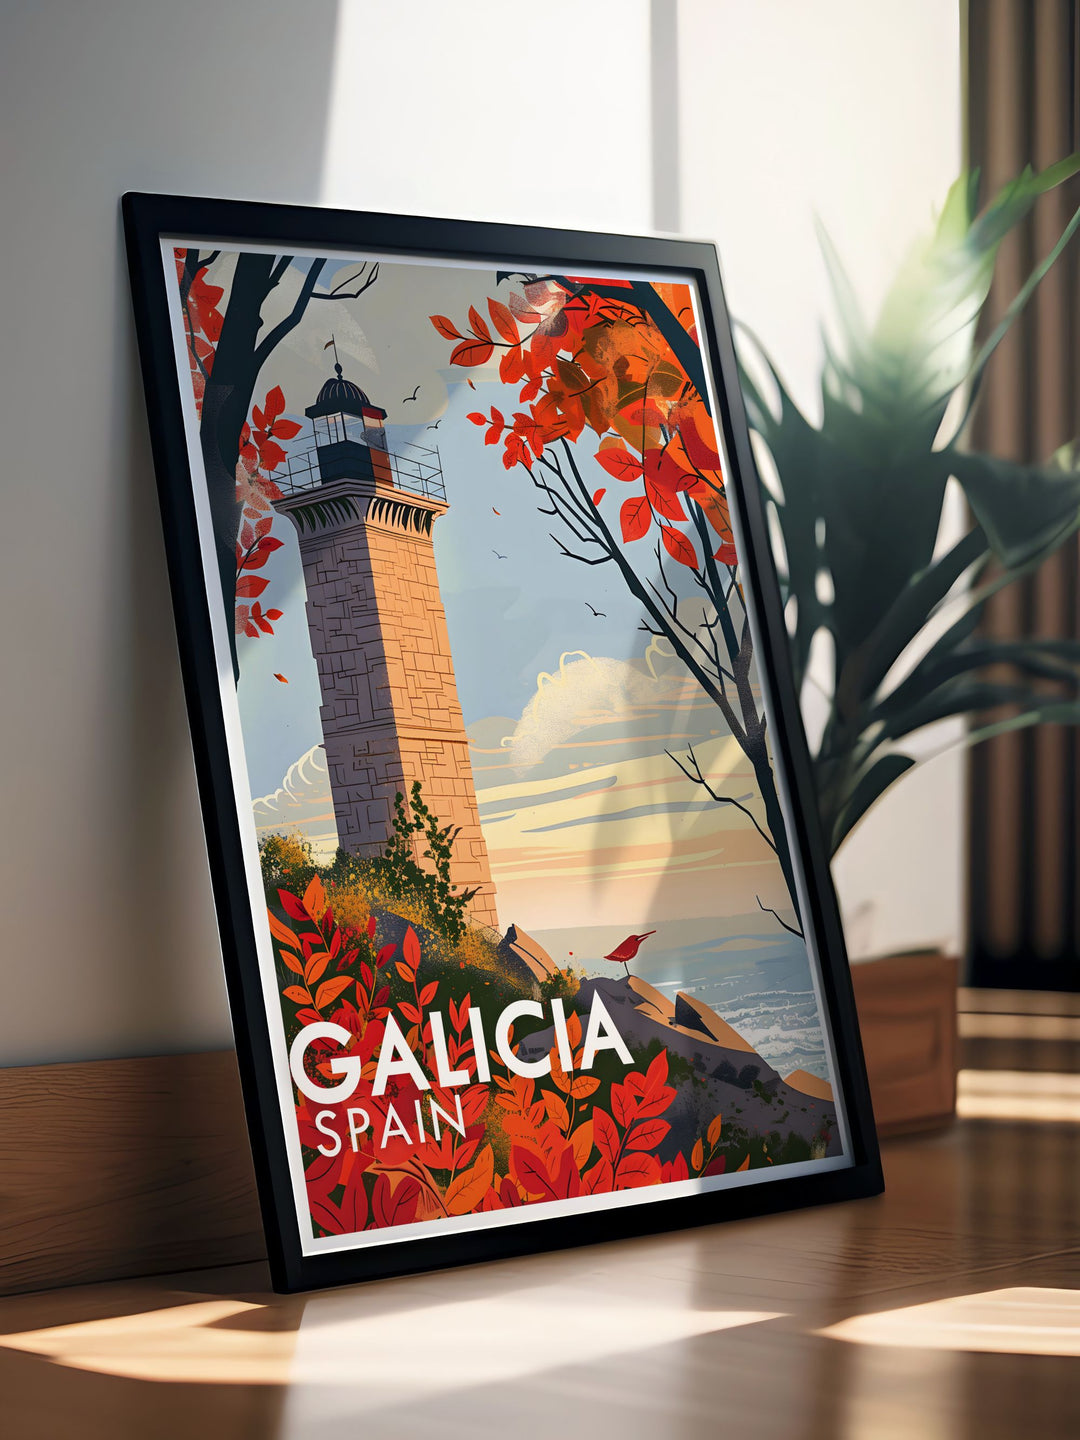 The rocky peninsula and breathtaking Atlantic Ocean views surrounding the Tower of Hercules are vividly illustrated in this artwork.